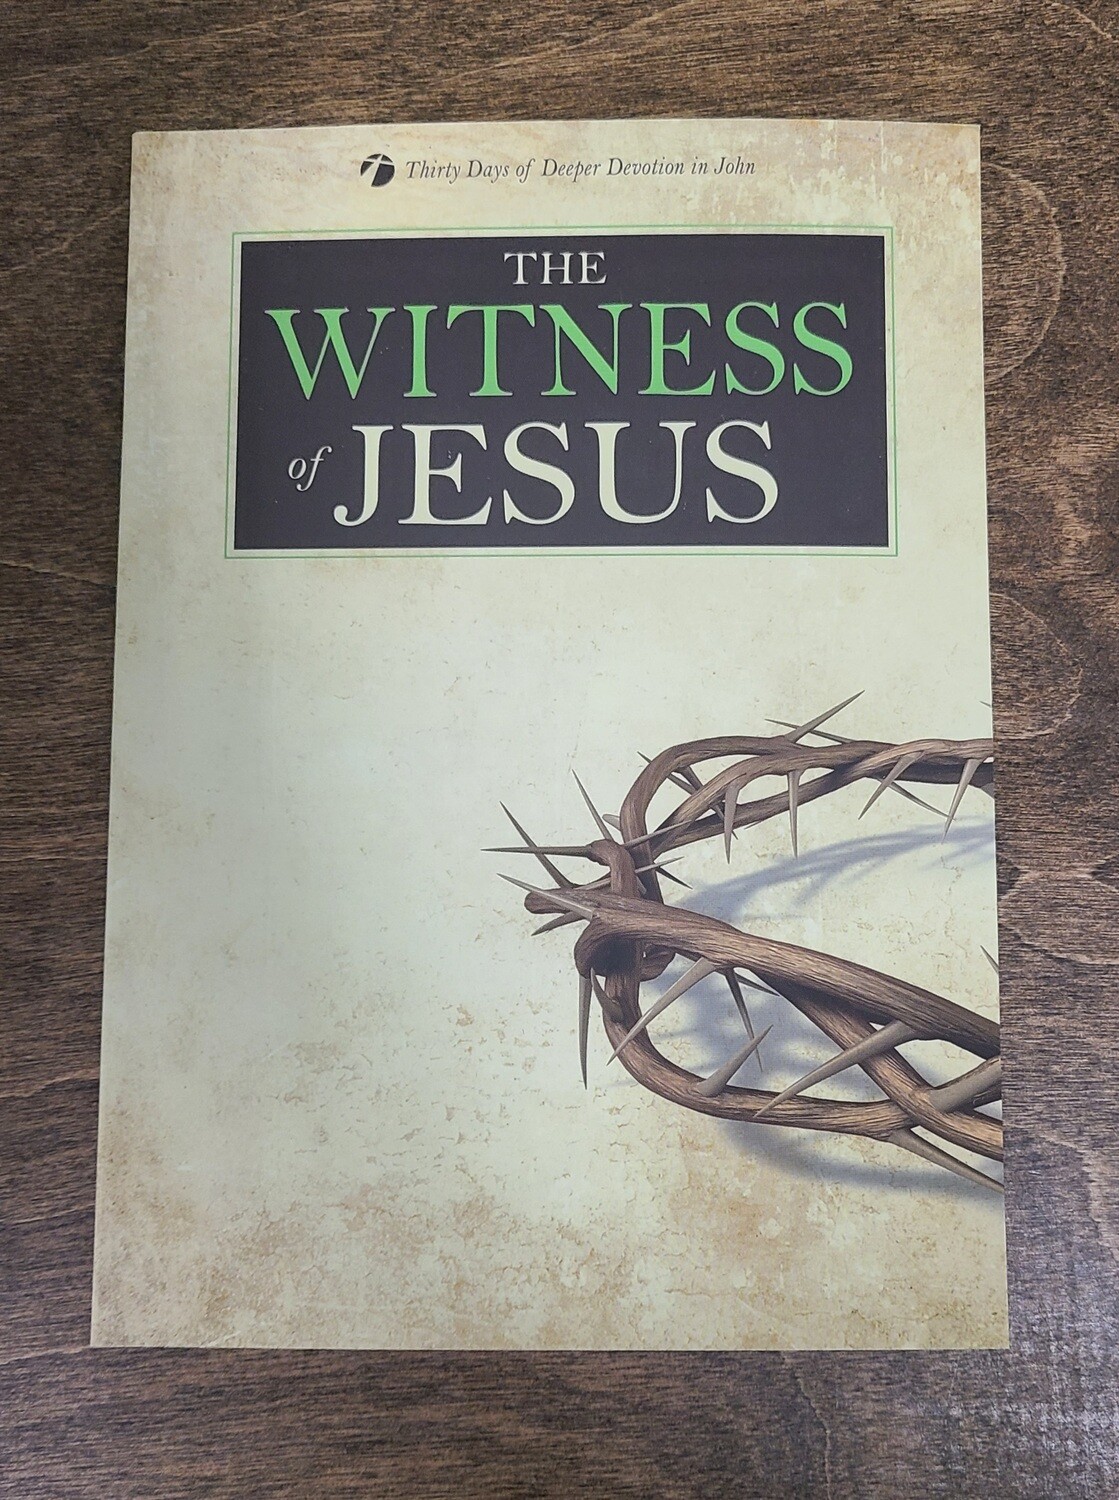 The Witness of Jesus by Kenneth Schenck